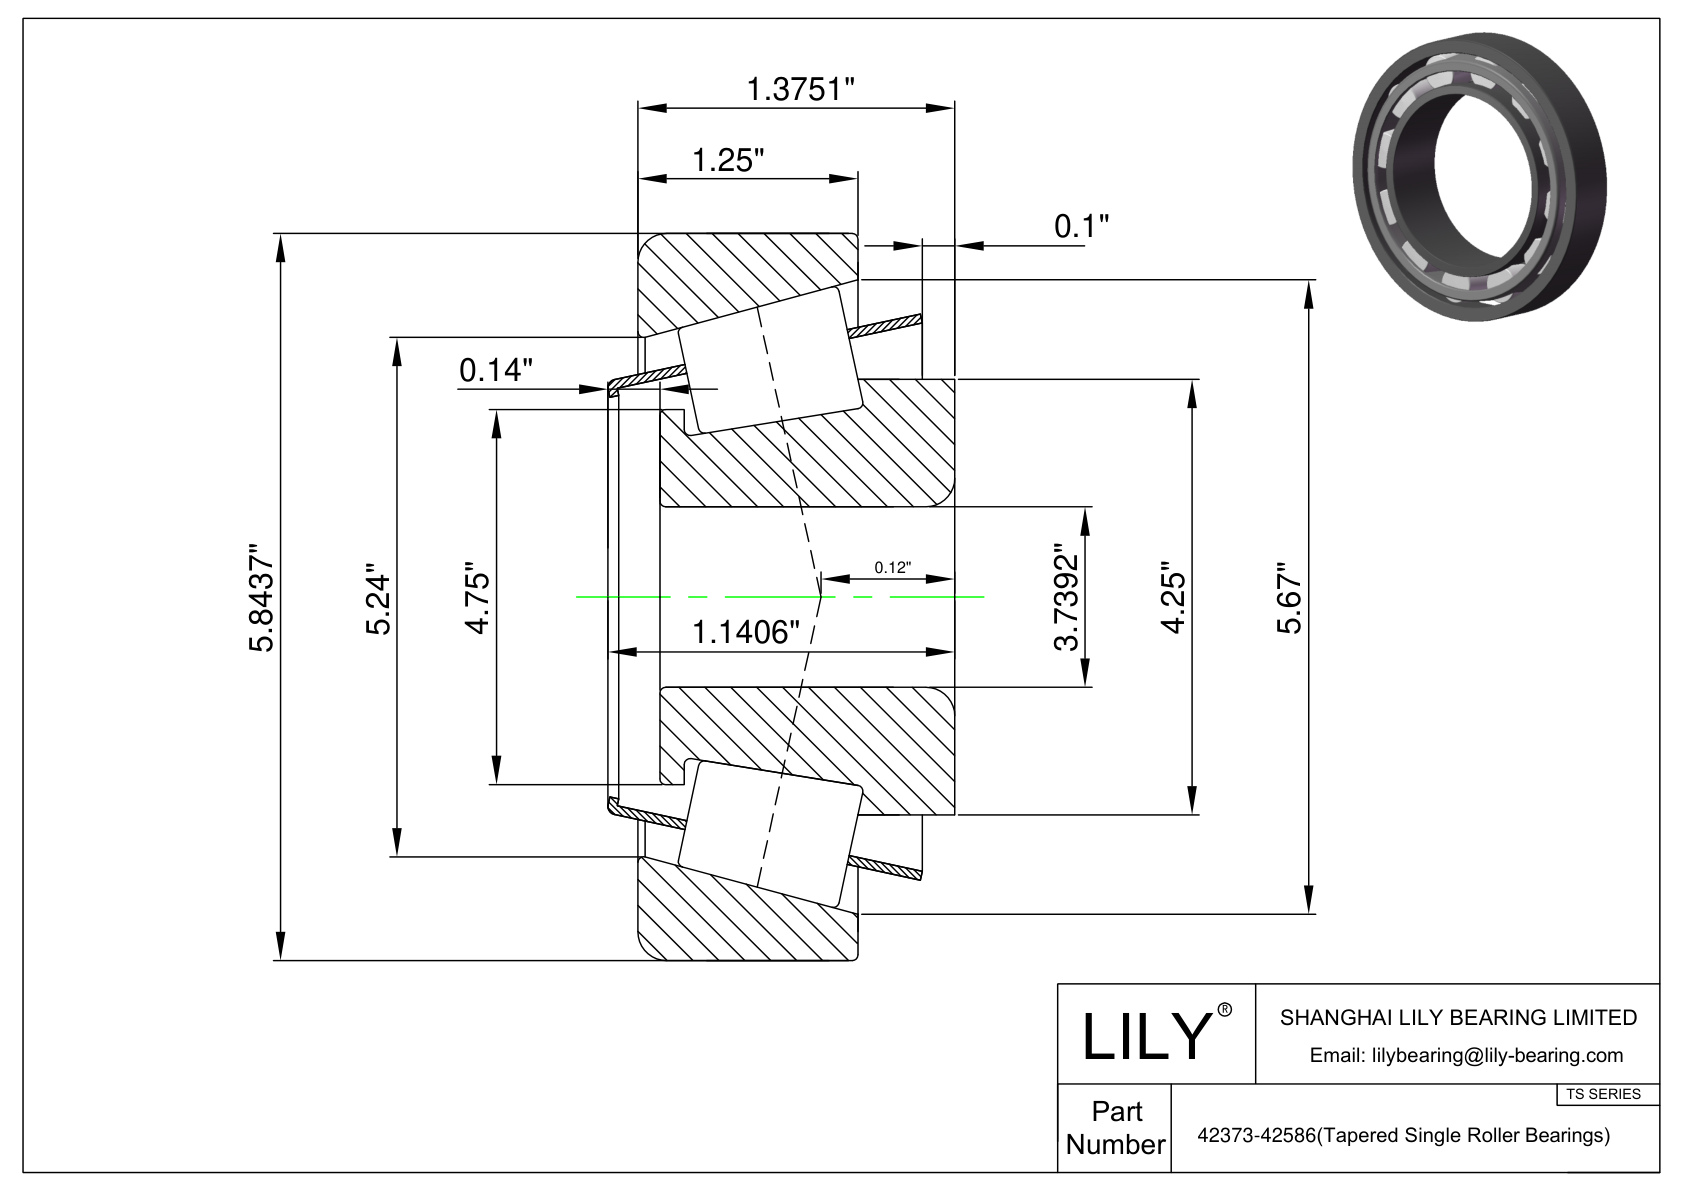 42373-42586 TS (Tapered Single Roller Bearings) (Imperial) cad drawing